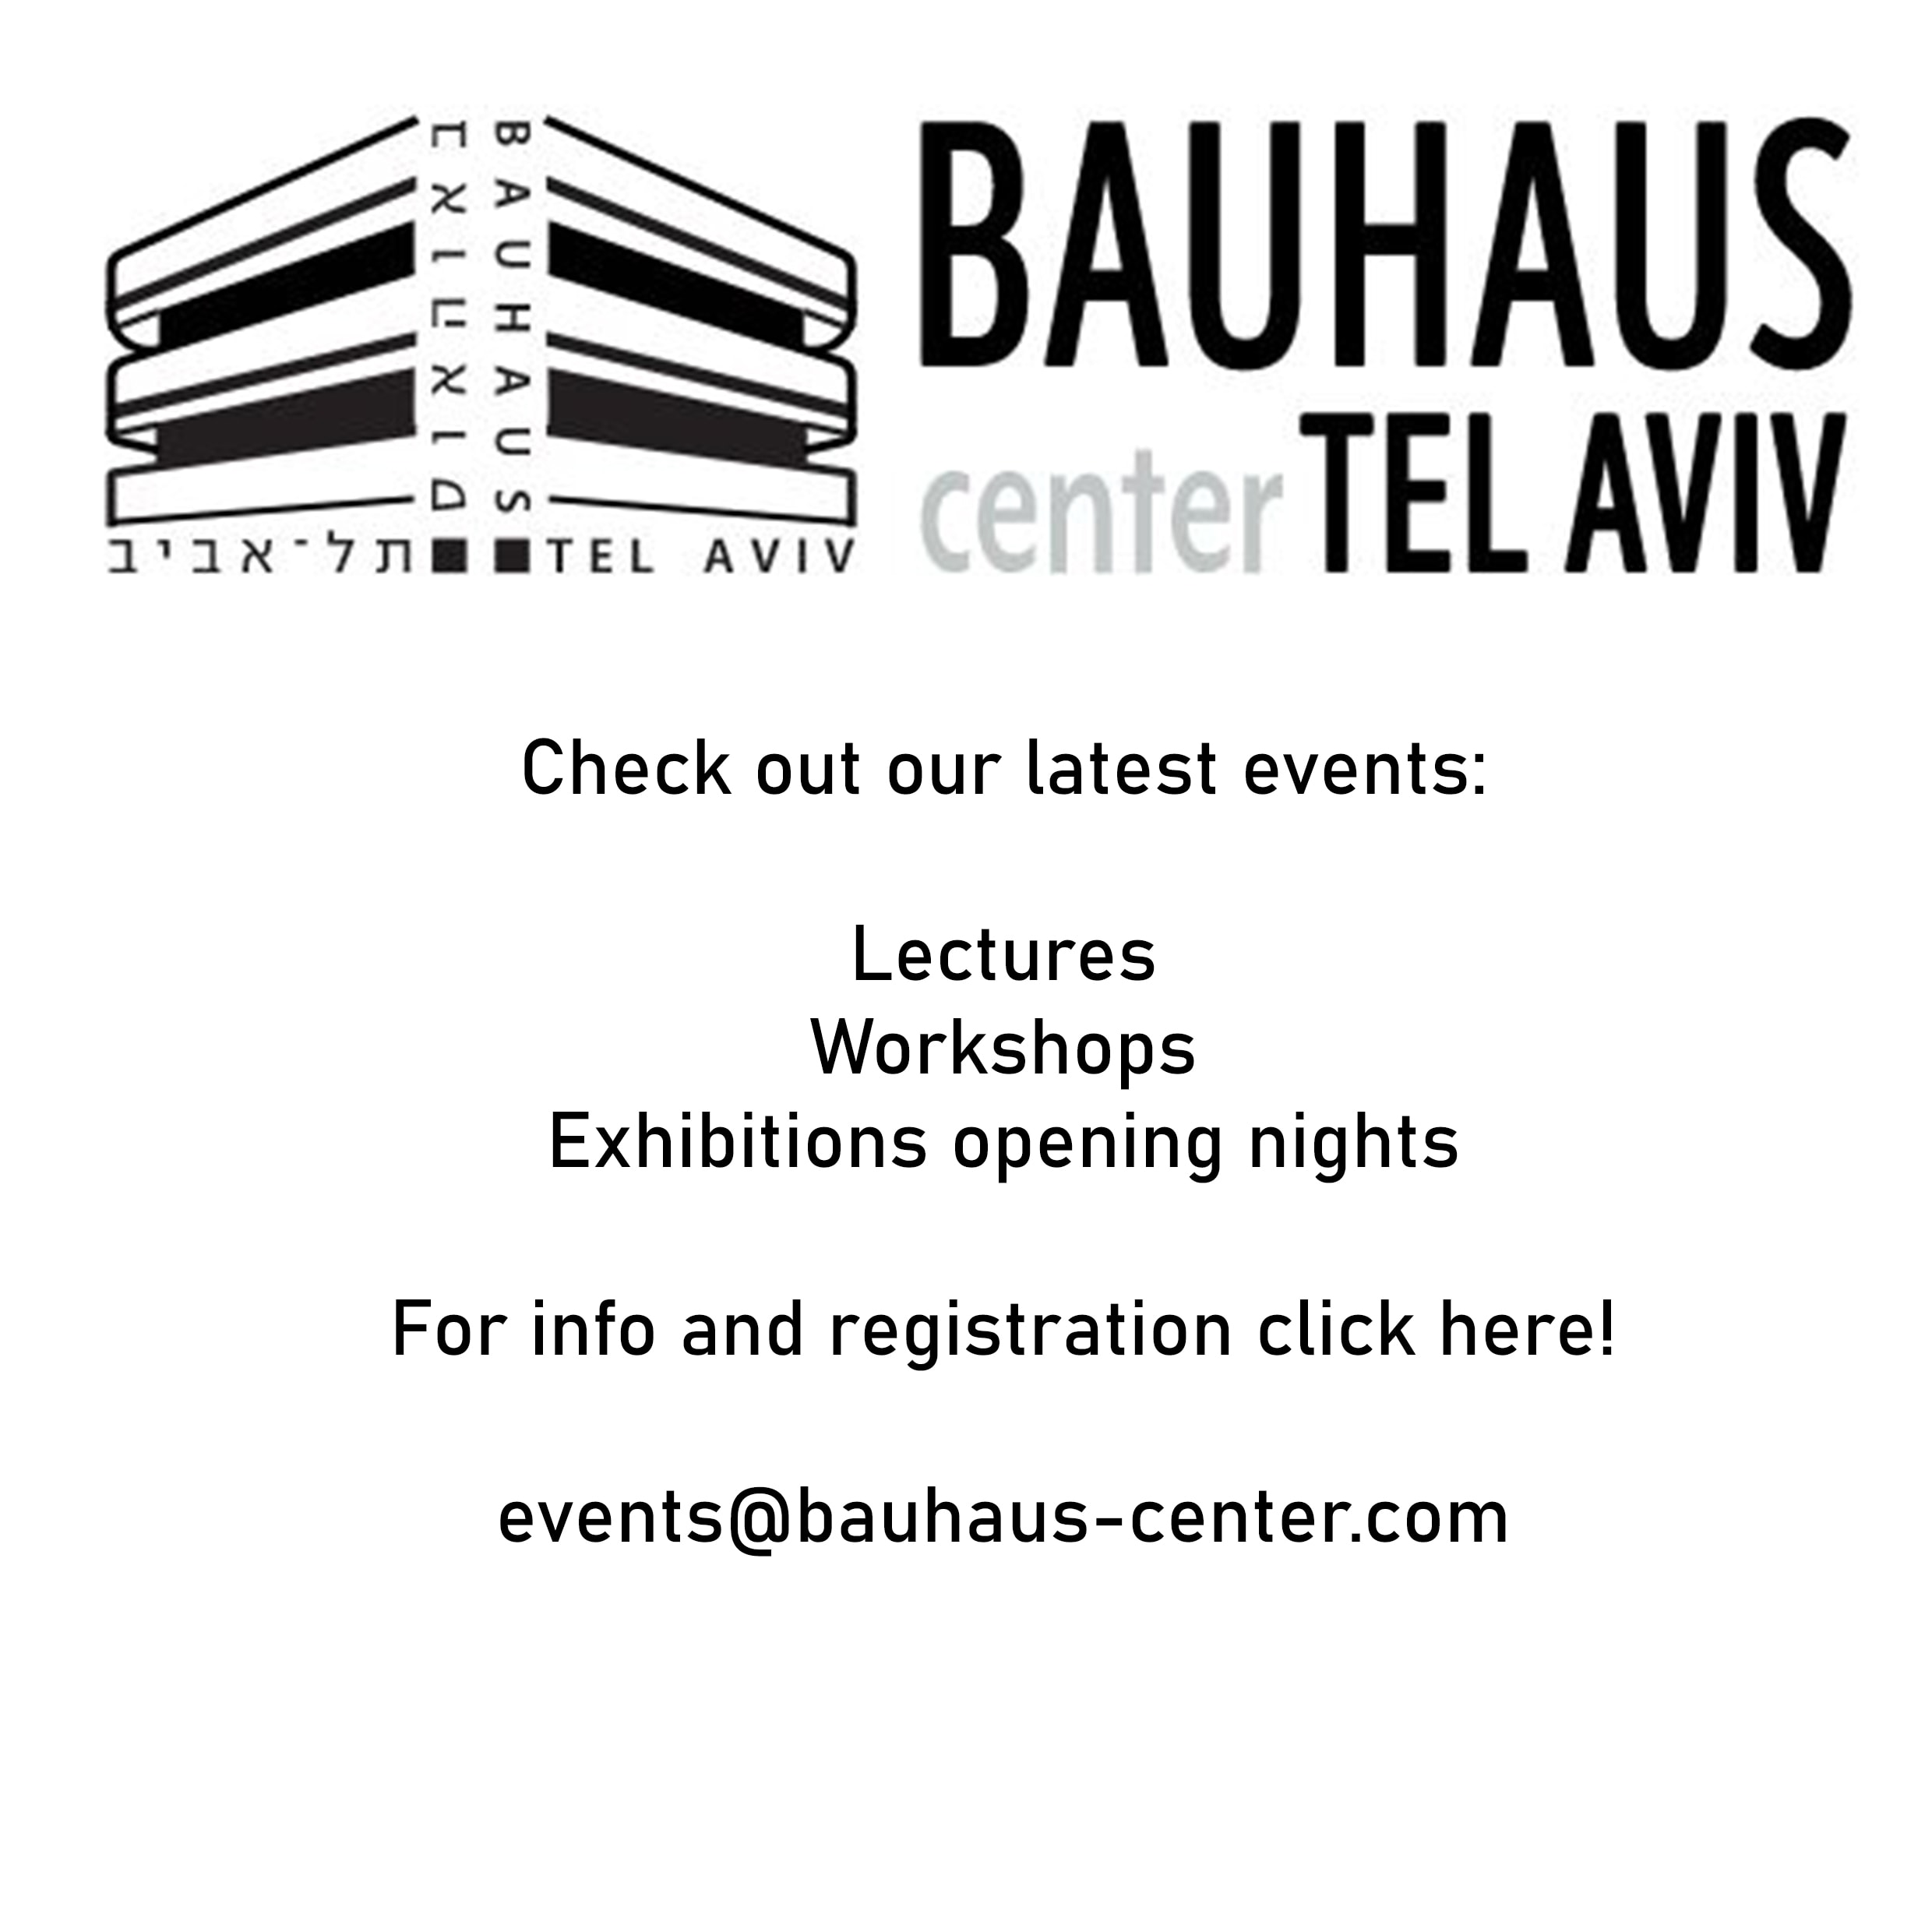 Upcoming Events at the Bauhaus Center